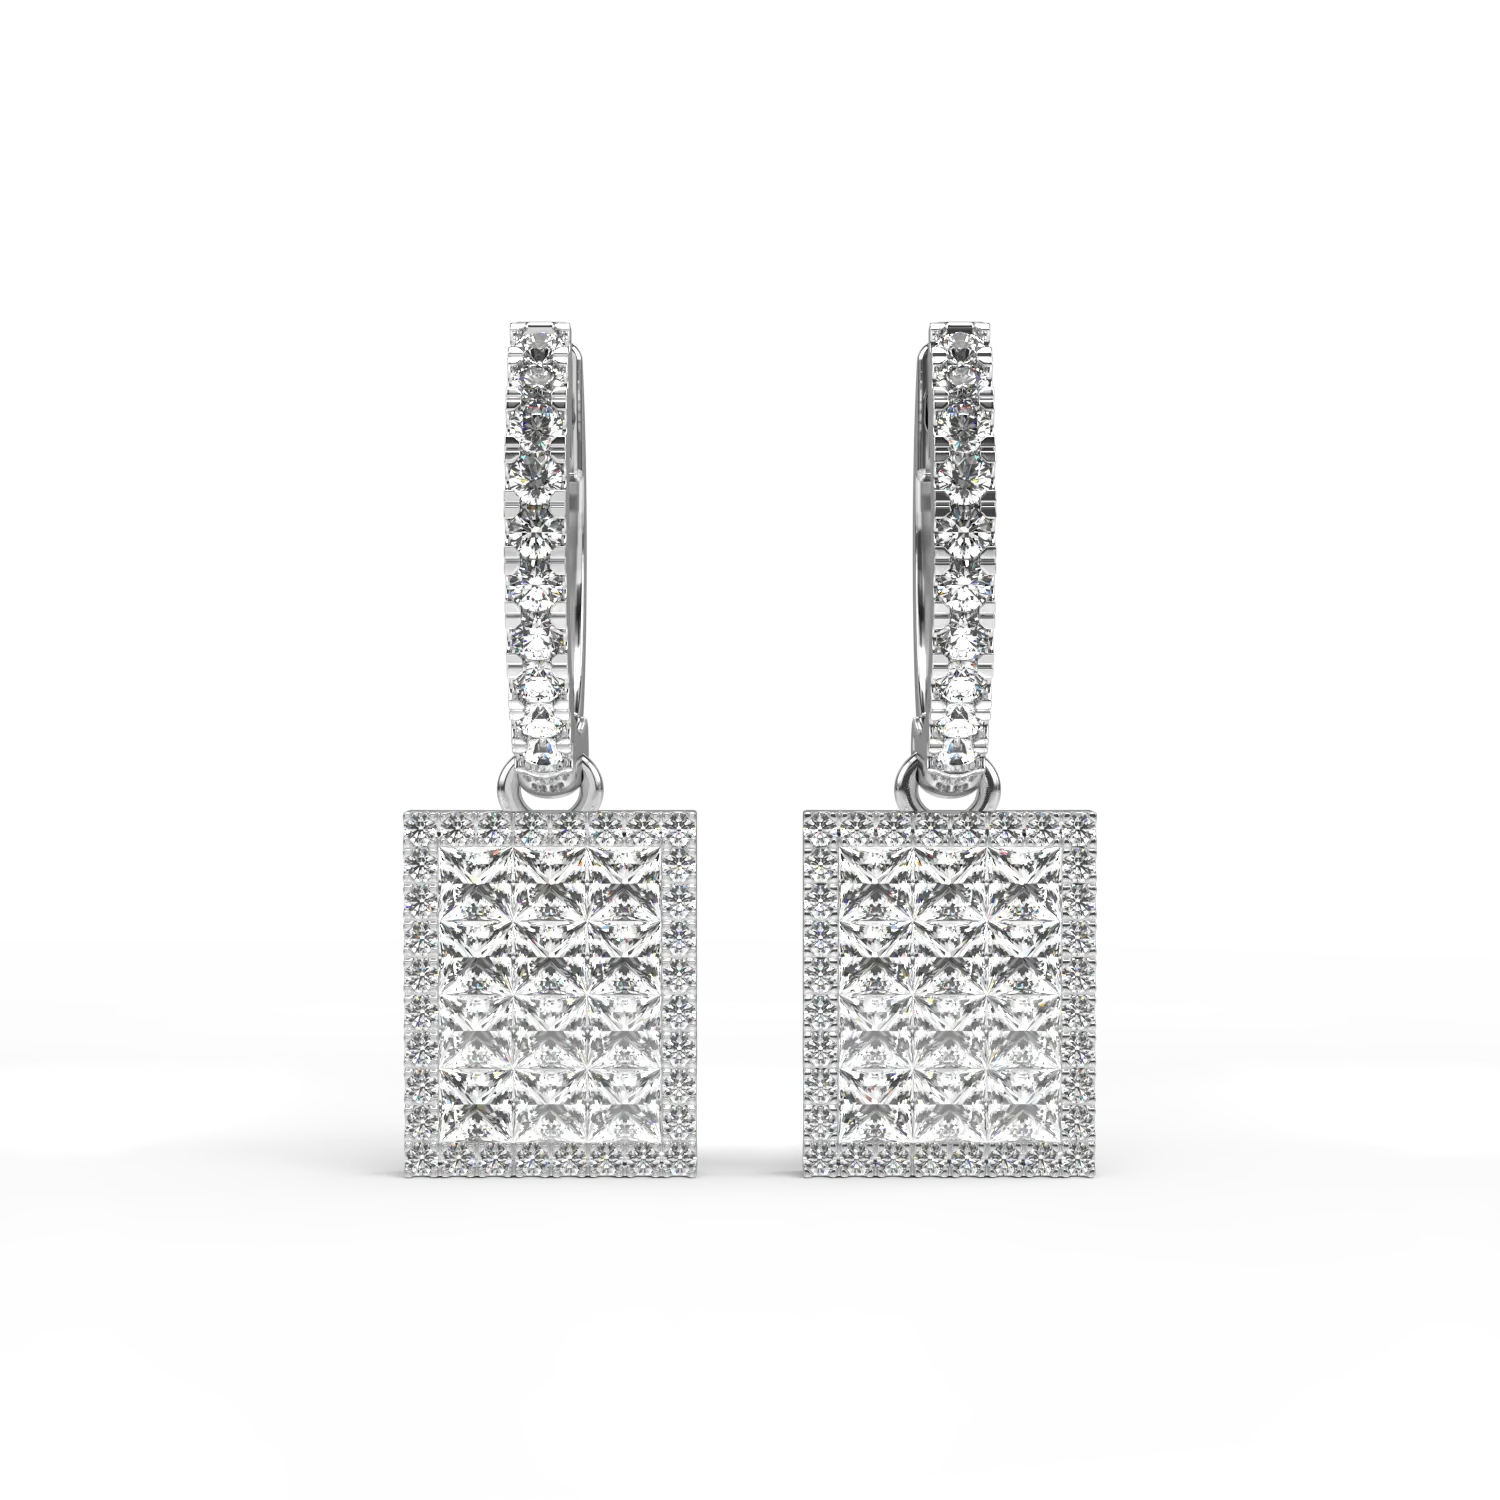 18K white gold earrings with 1.27ct diamonds